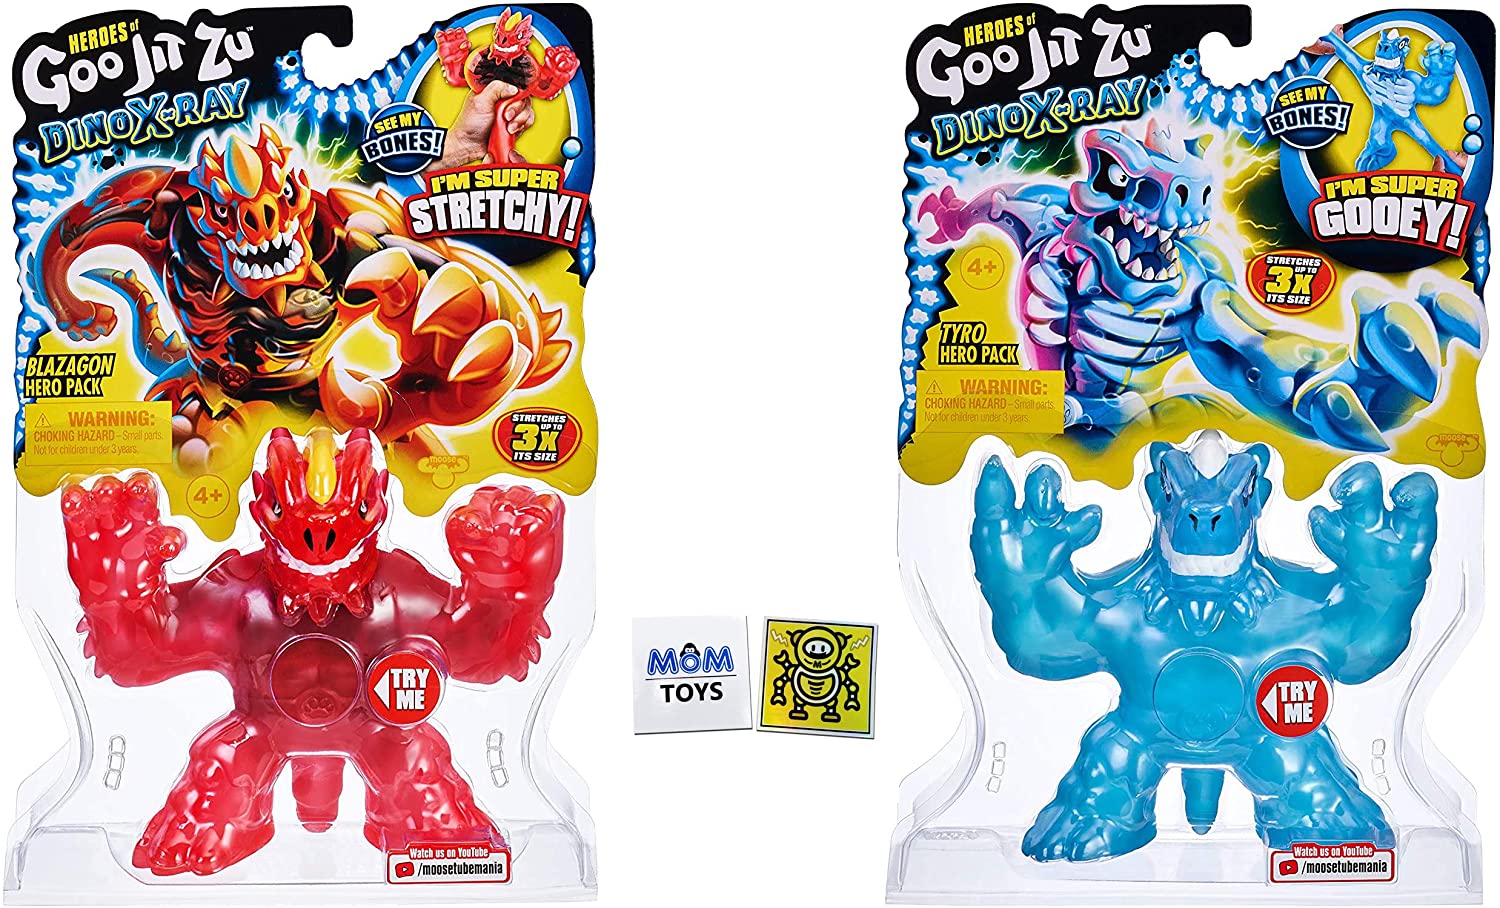 MOTIONRUSH Heroes of Goo JIT Zu Dino X-Ray Action Figure 2 Pack - Tyro and Blazagon with 2 My Outlet Mall Stickers